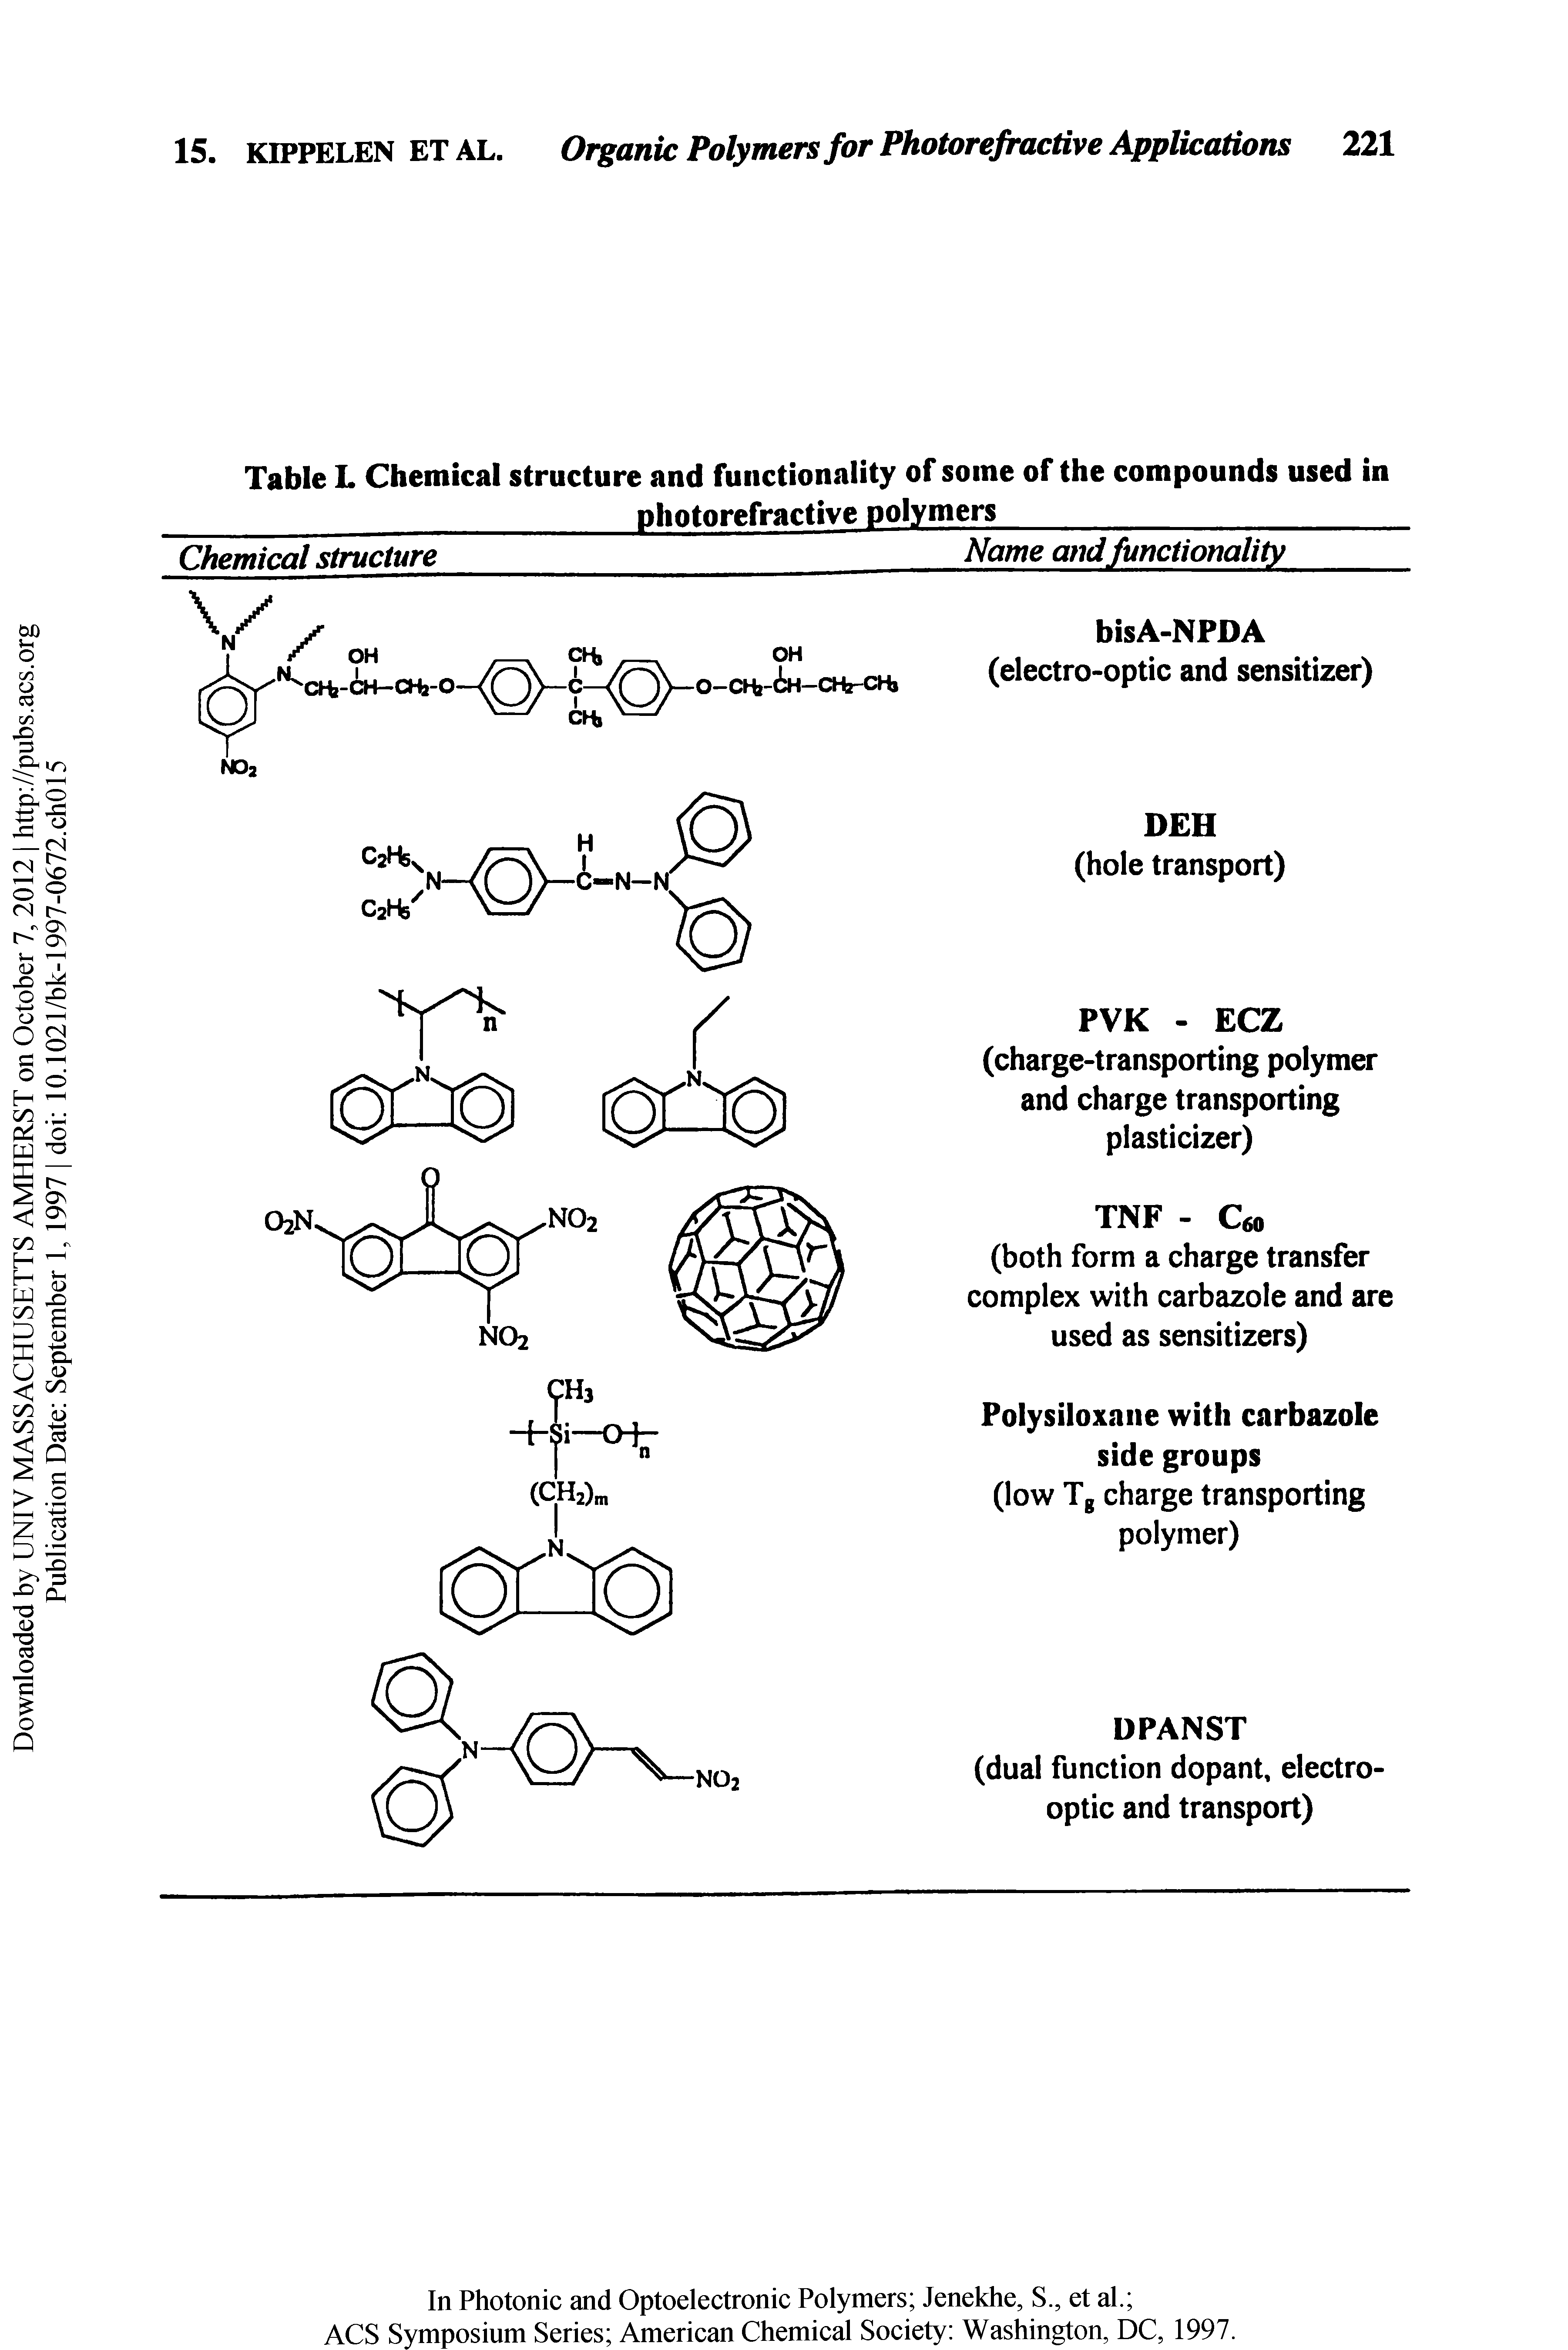 Table L Chemical structure and functionality of some of the compounds used in photorefractive polymers...